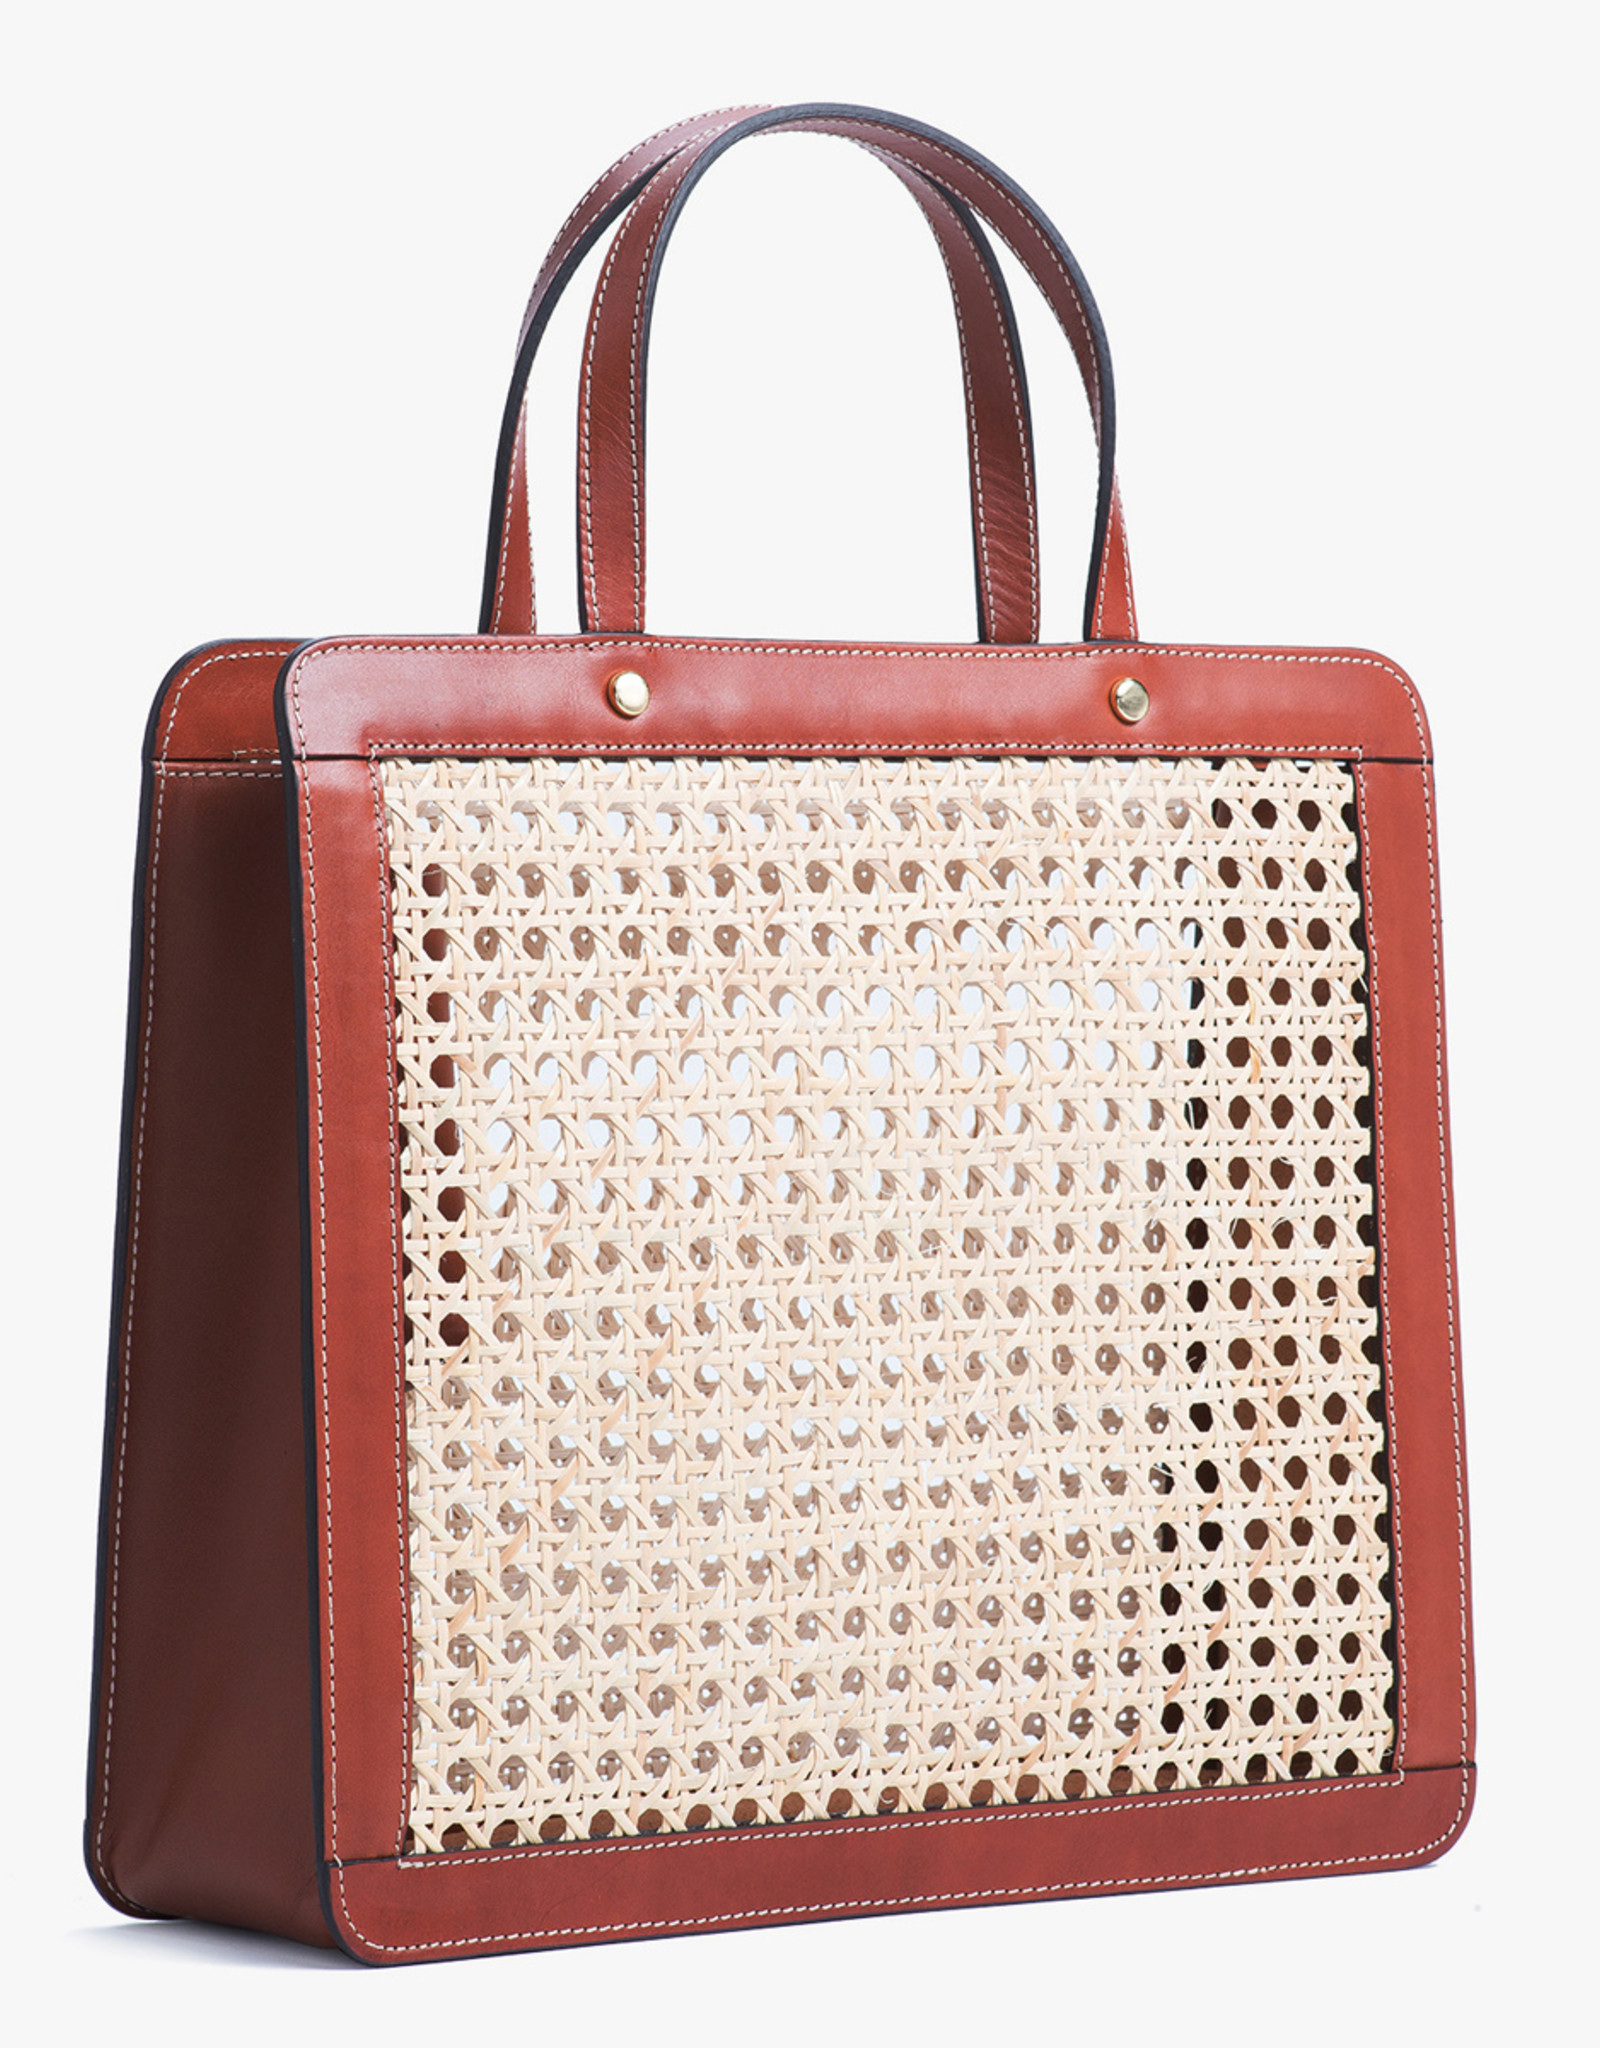 Classic Rattan Bag by Palmgrens | Cognac leather